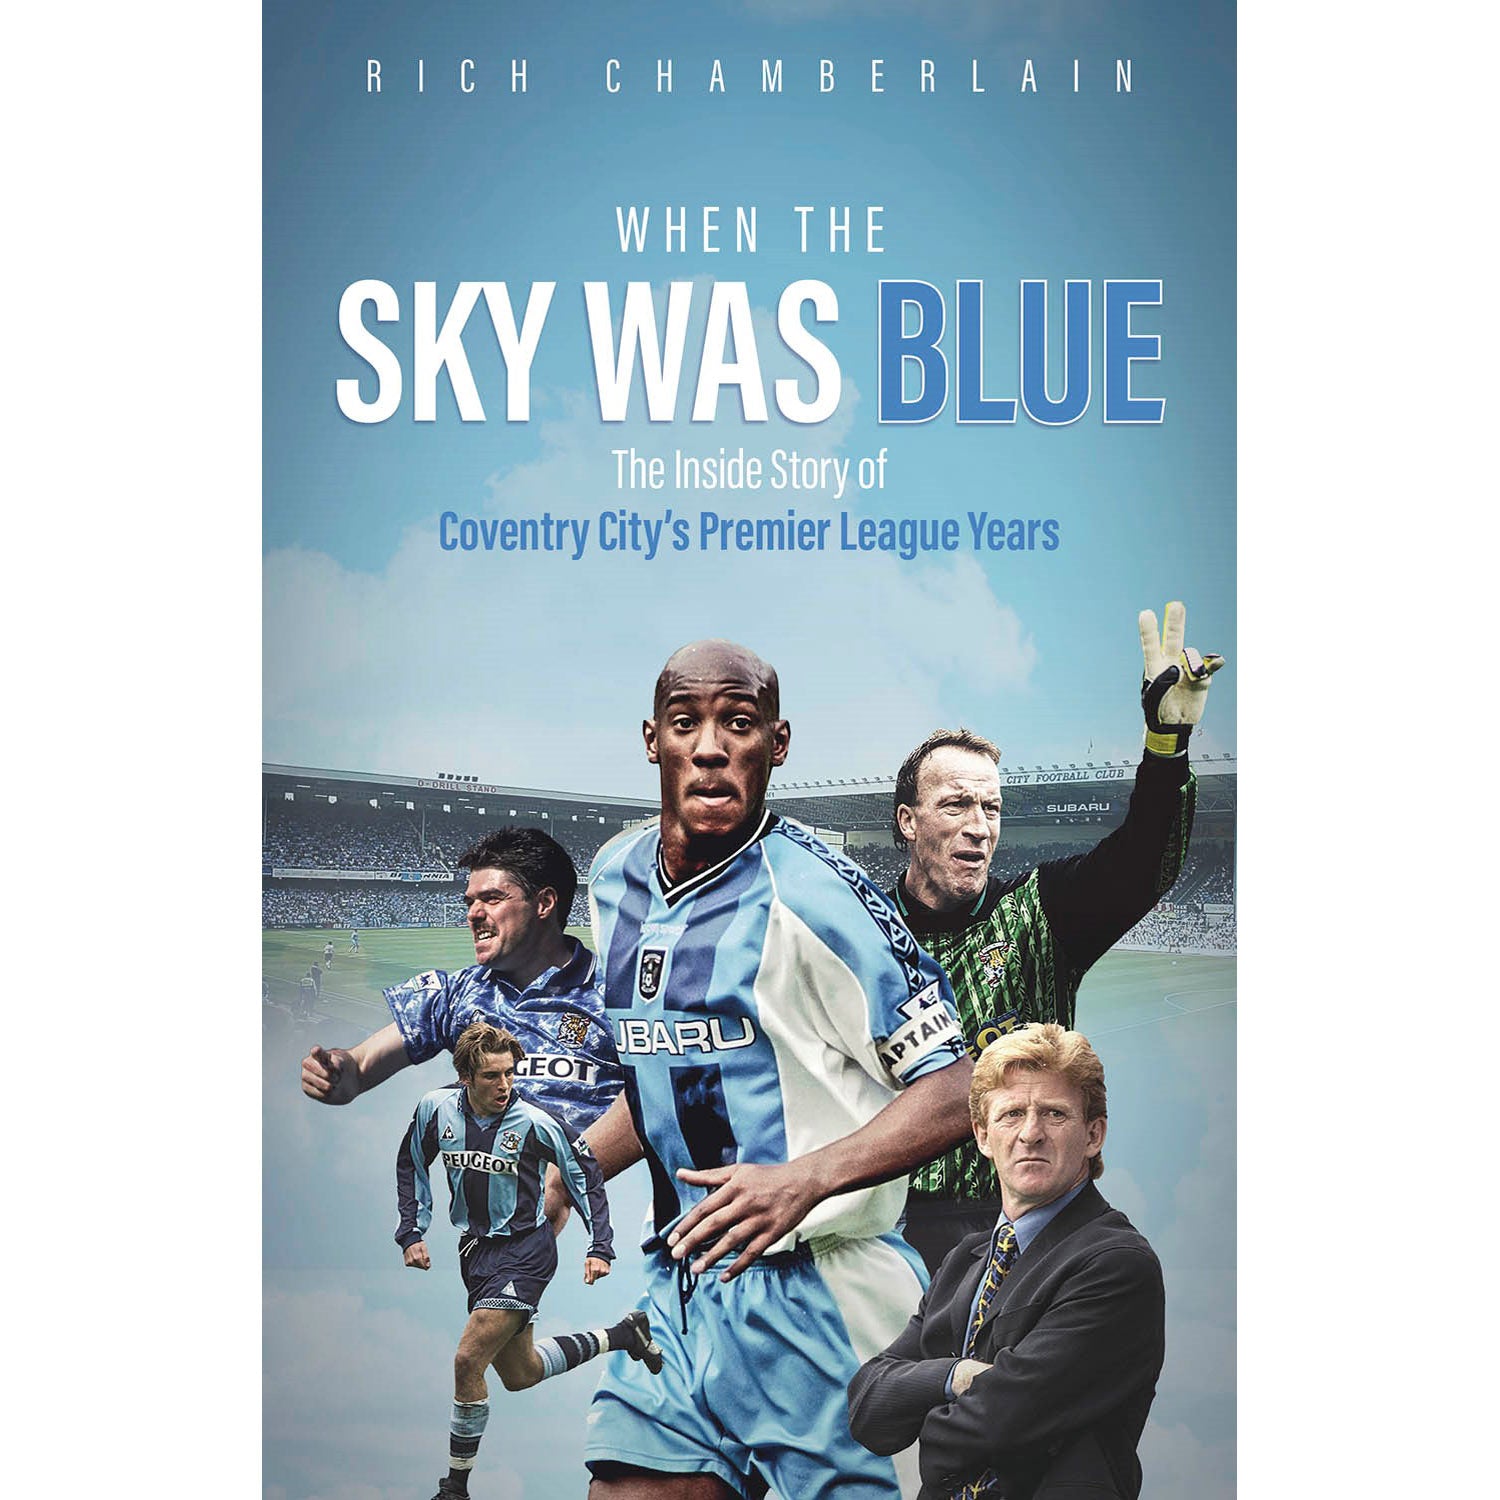 When the Sky Was Blue – The Inside Story of Coventry City's Premier League Years